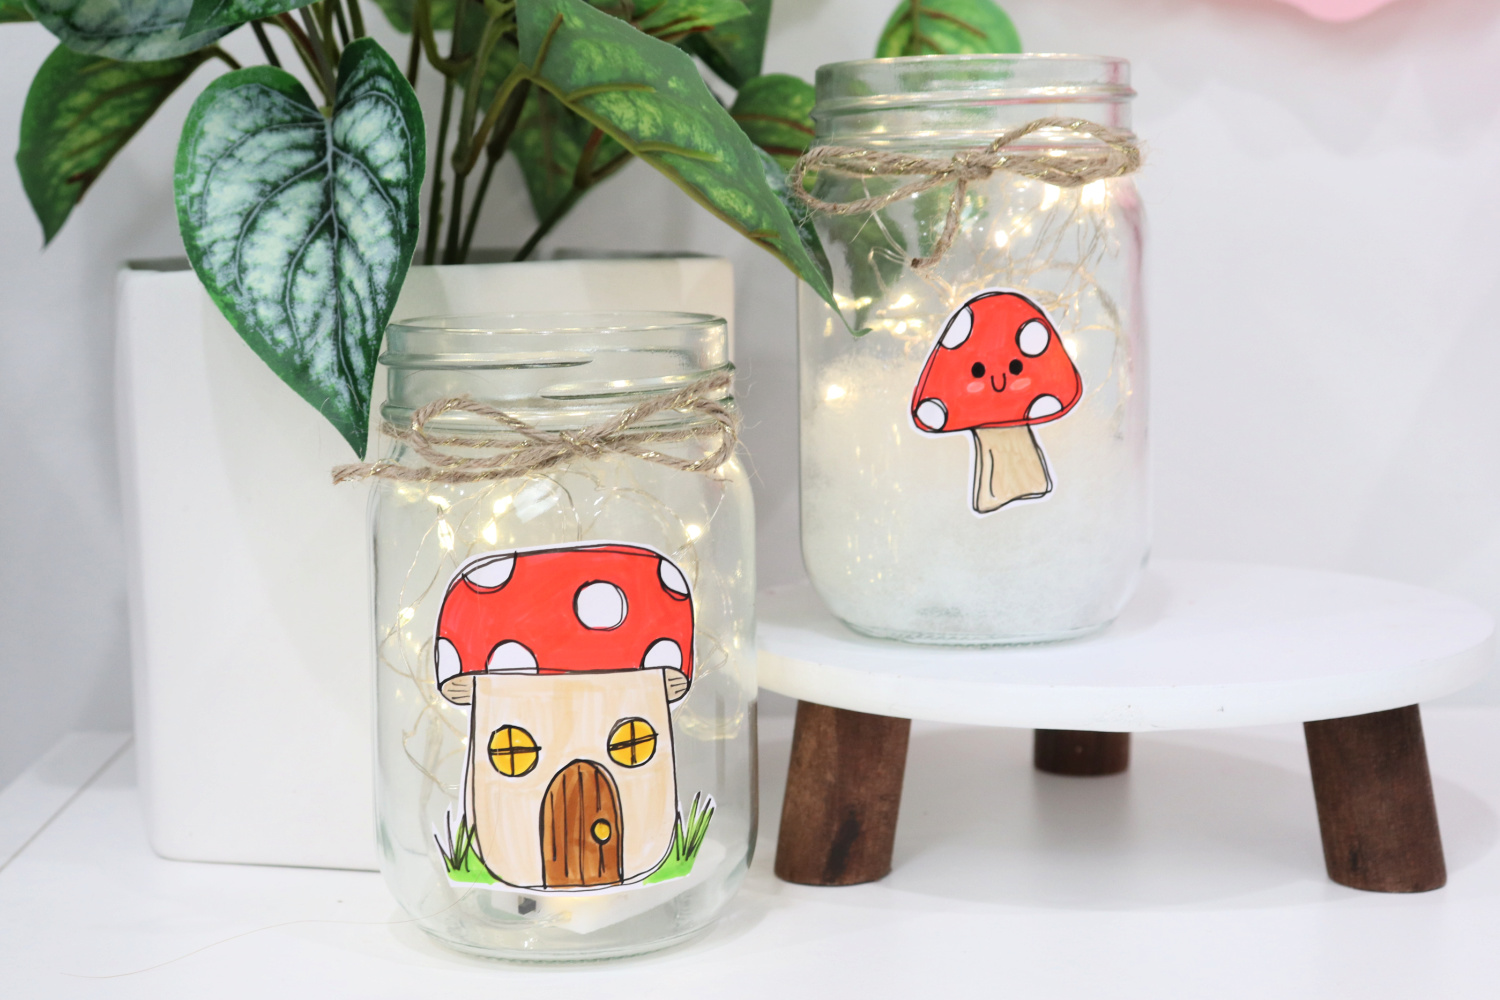 Image contains two completed cottage core lanterns; one decorated with a toadstool house, and one with a smiling toadstool. A faux plant sits in the background.